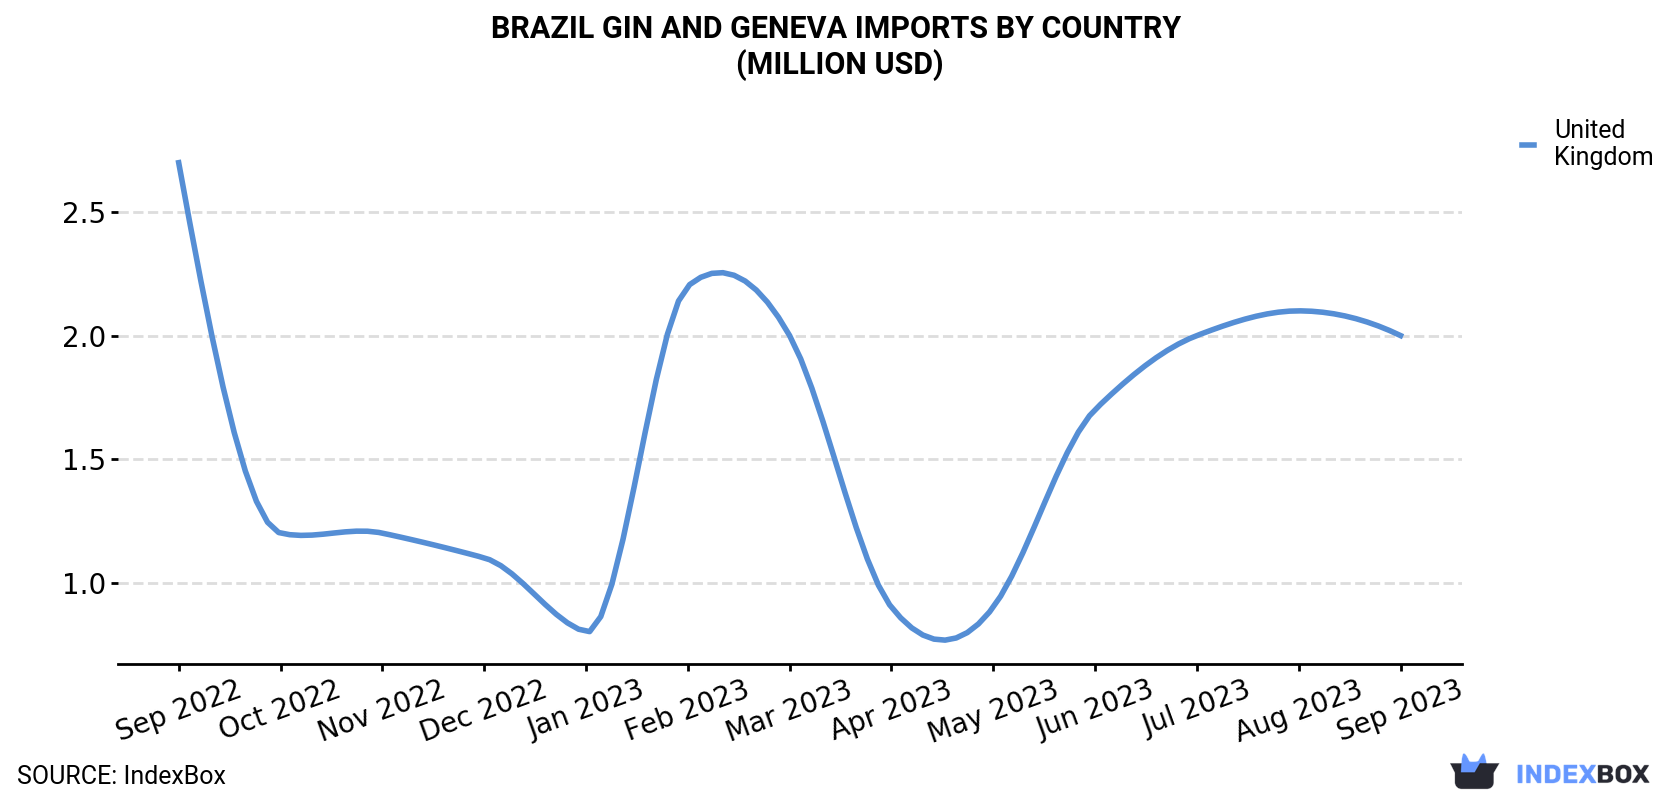 Brazil Gin And Geneva Imports By Country (Million USD)